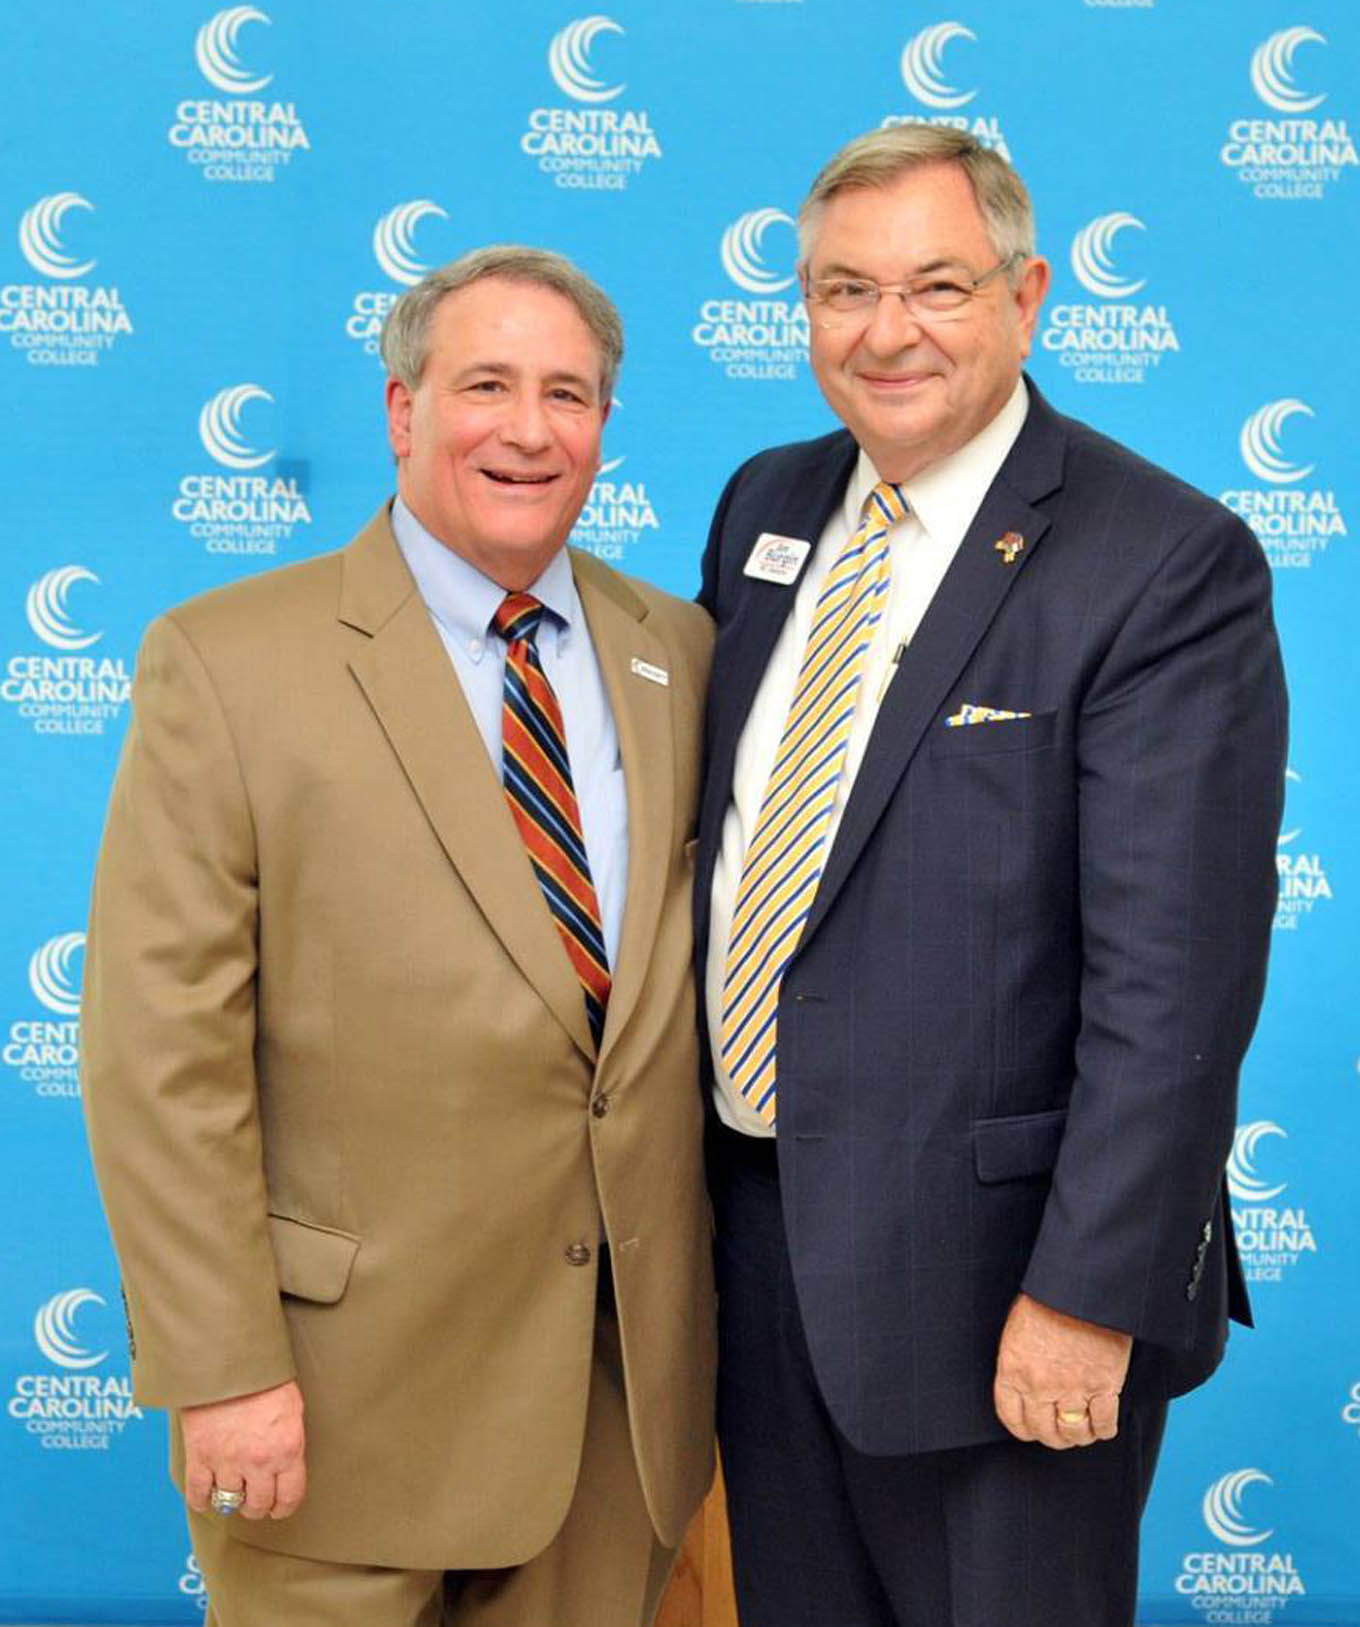 Click to enlarge,  Julian Philpott (left) and Jim Burgin have been reappointed as Chairman and Vice Chairman, respectively, of the Central Carolina Community College Board of Trustees for 2018-2019. 